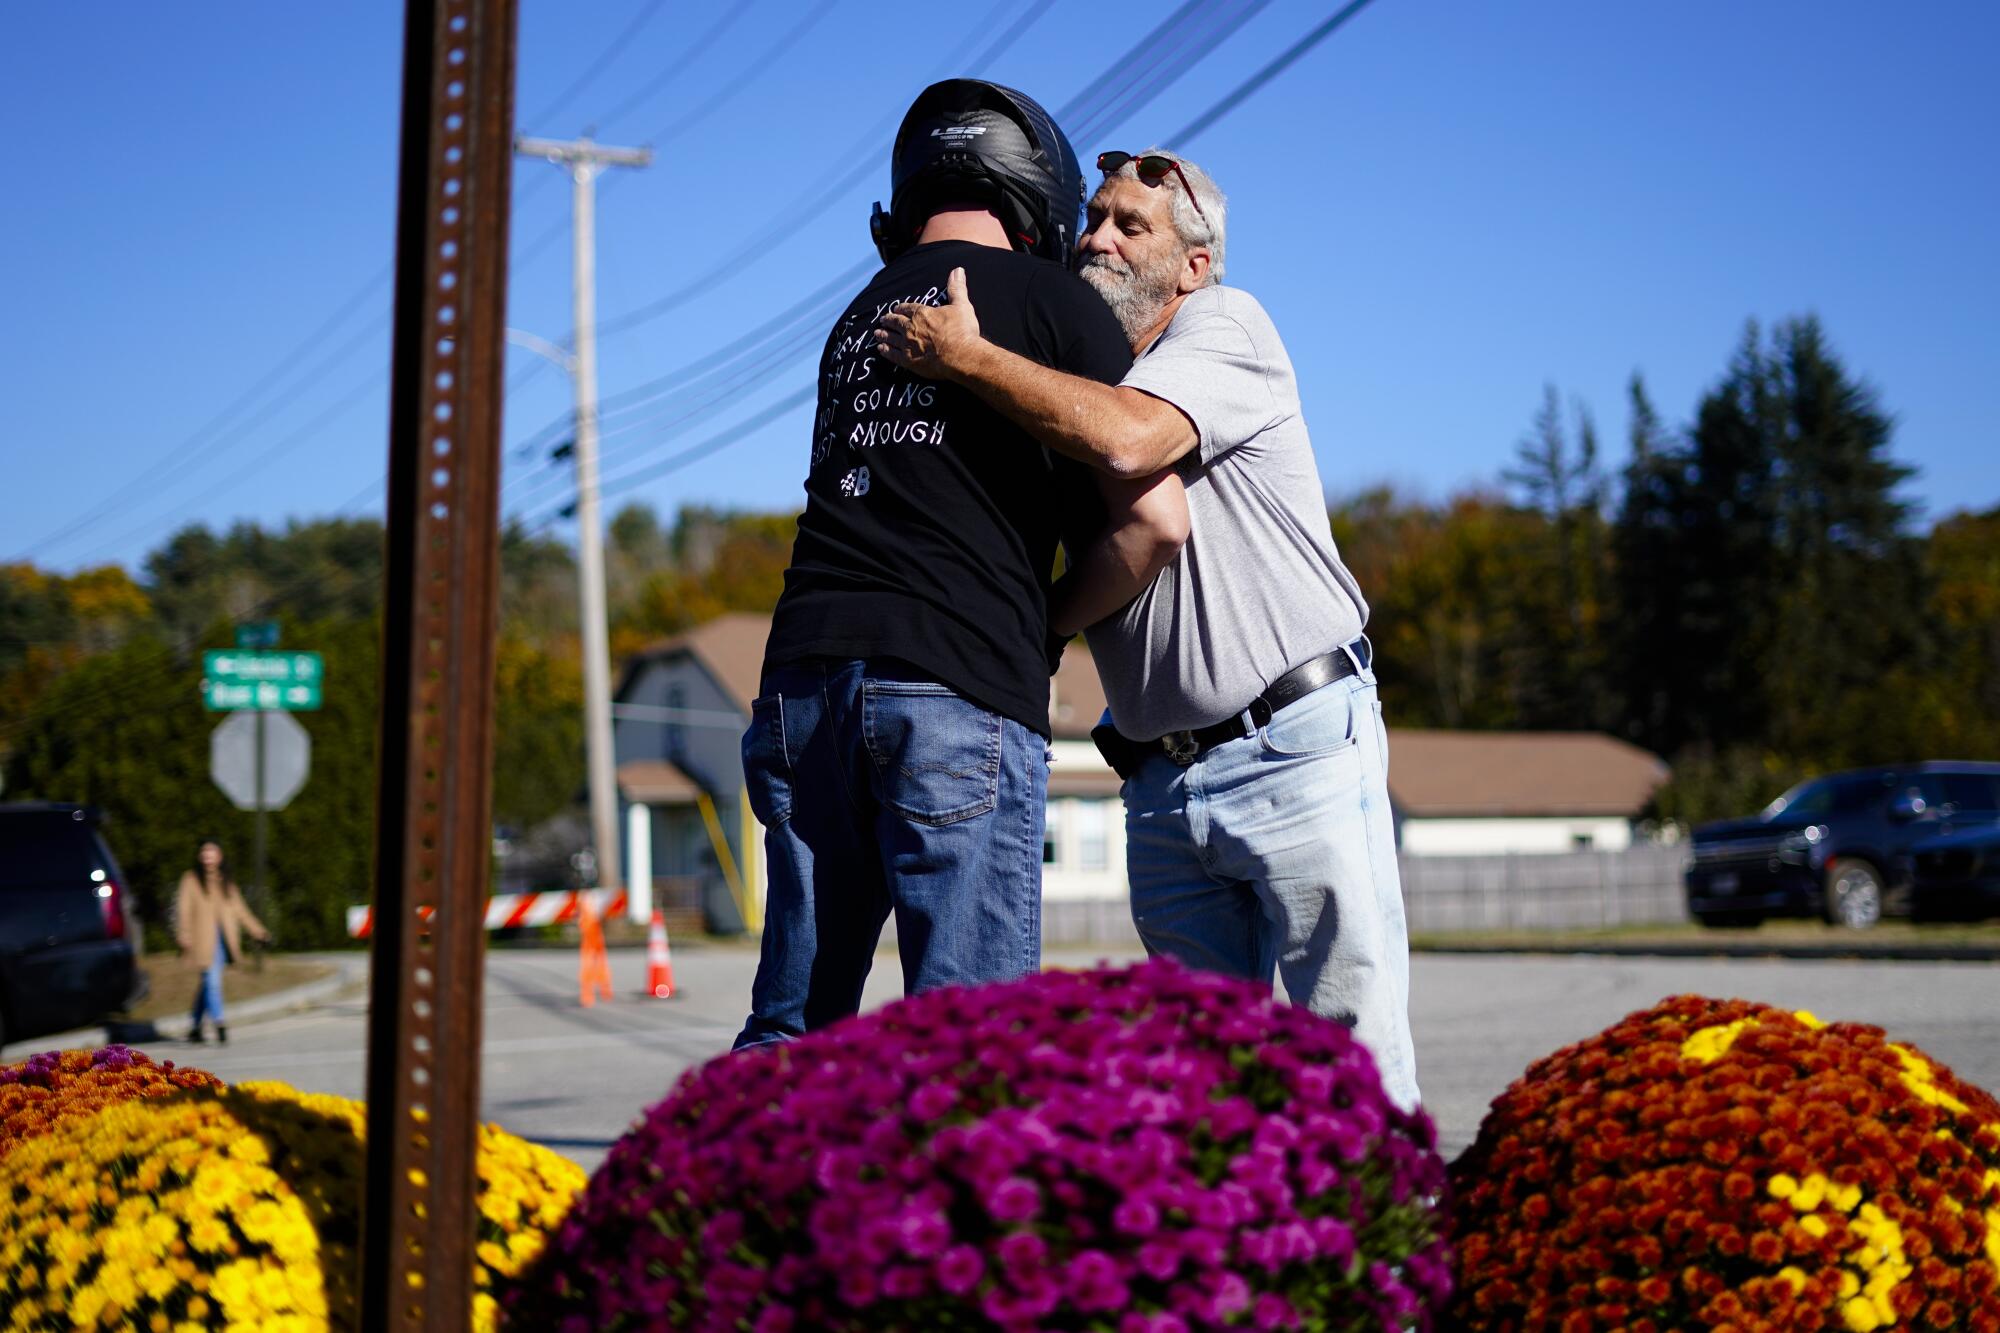 A man embraces a person in a motorcycle helmet next to bouquets of flowers